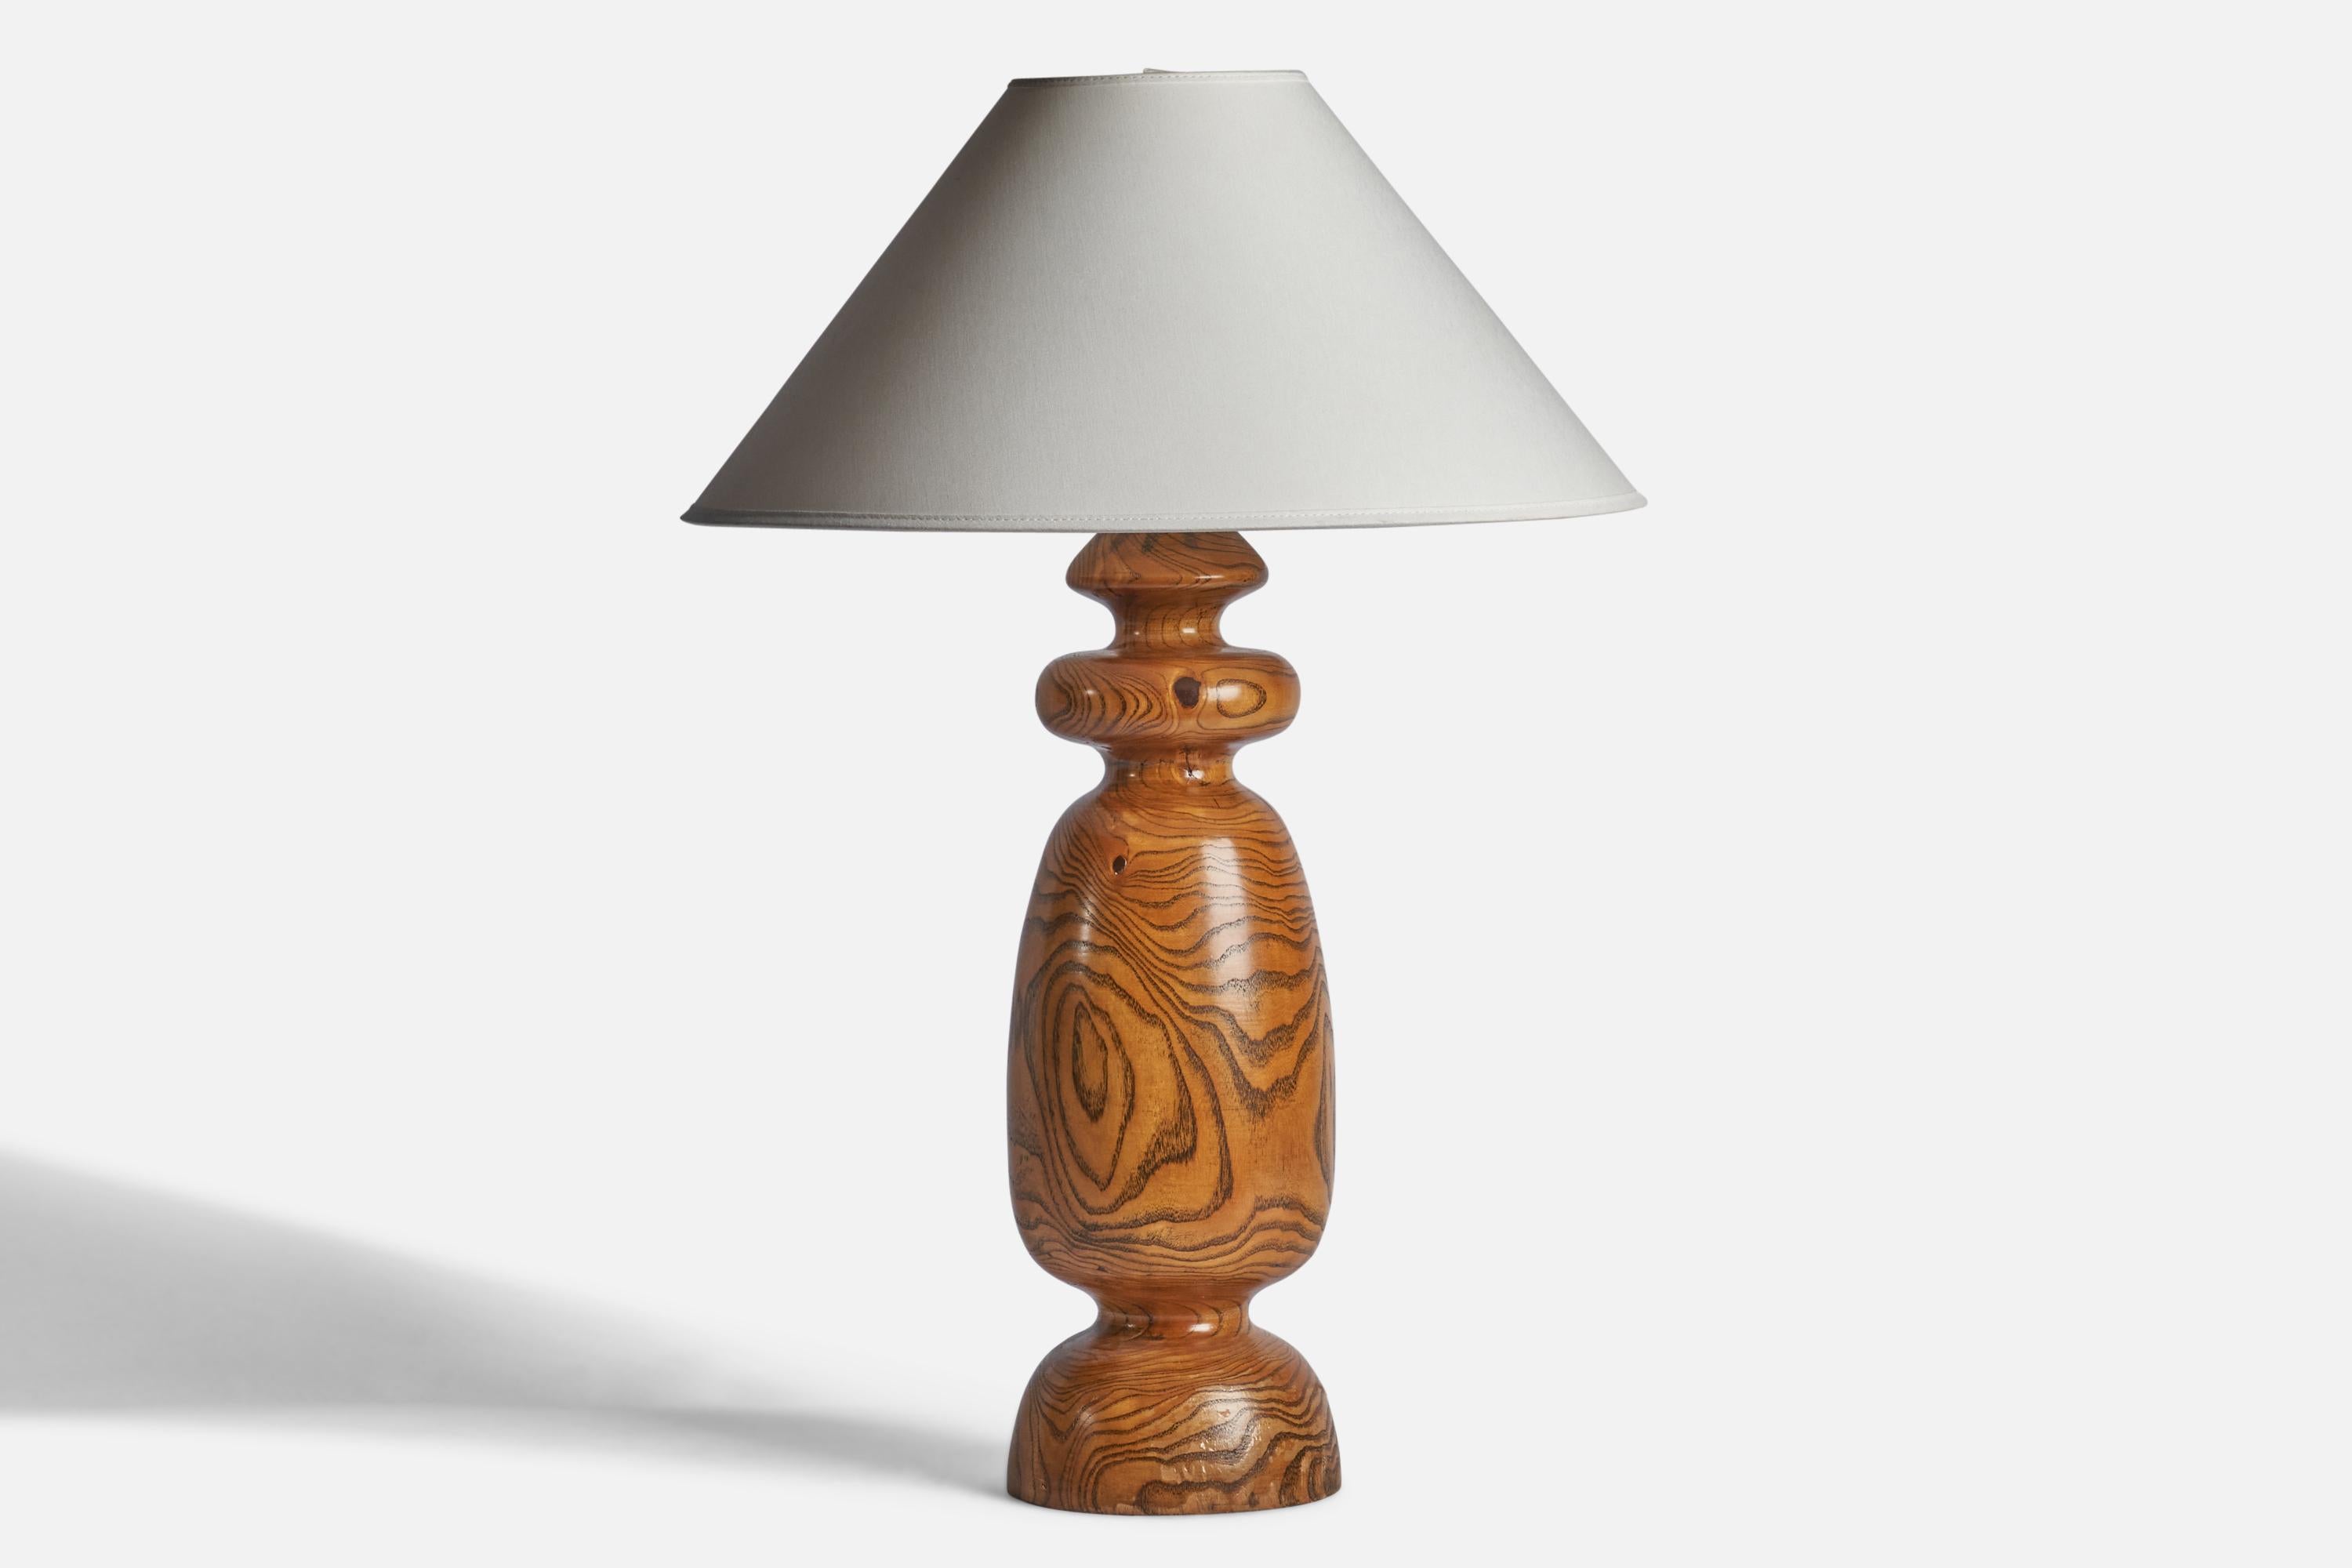 A turned pine table lamp designed and produced in the US, c. 1950s.

Dimensions of Lamp (inches): 19” H x 5.55” Diameter
Dimensions of Shade (inches): 4.5” Top Diameter x 16” Bottom Diameter x 7.15” H 
Dimensions of Lamp with Shade (inches): 23.95”